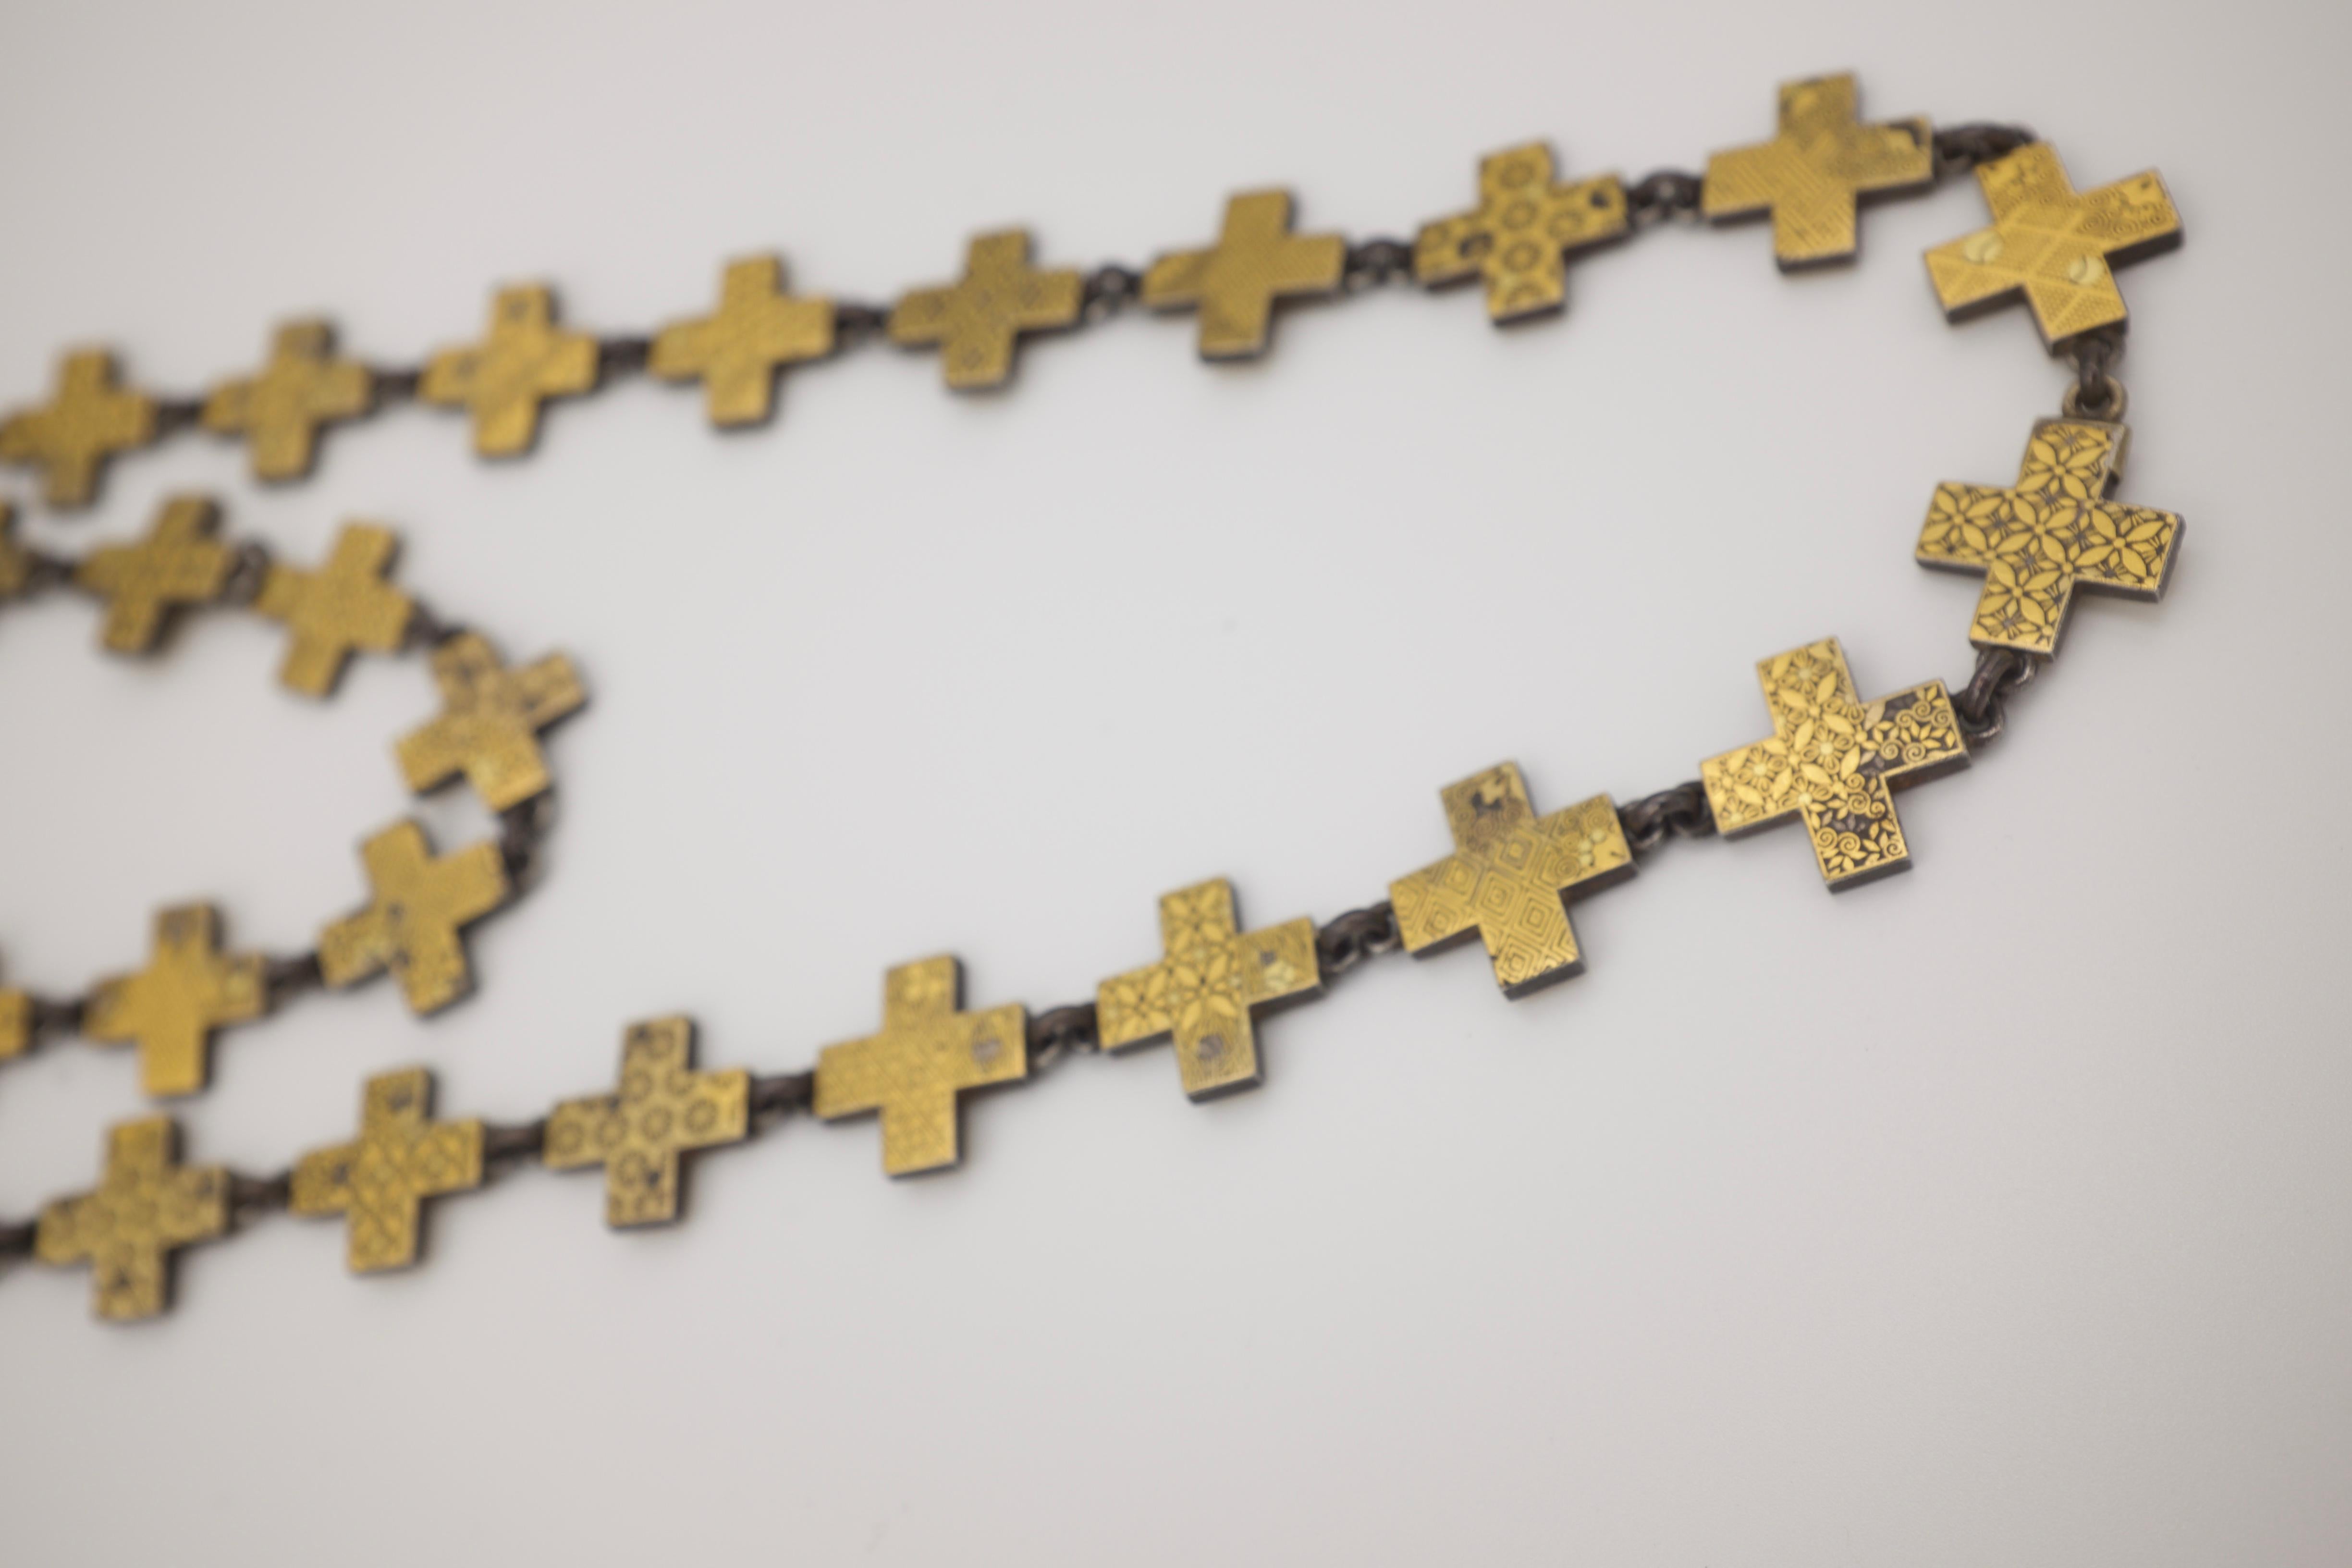 Each of the 72 crosses is hand carved in unique pattern of wonderful symmetry.  Gold and Iron, this shakudo necklace is top quality and style.  Clasp is more recent, industrial, but cool.  